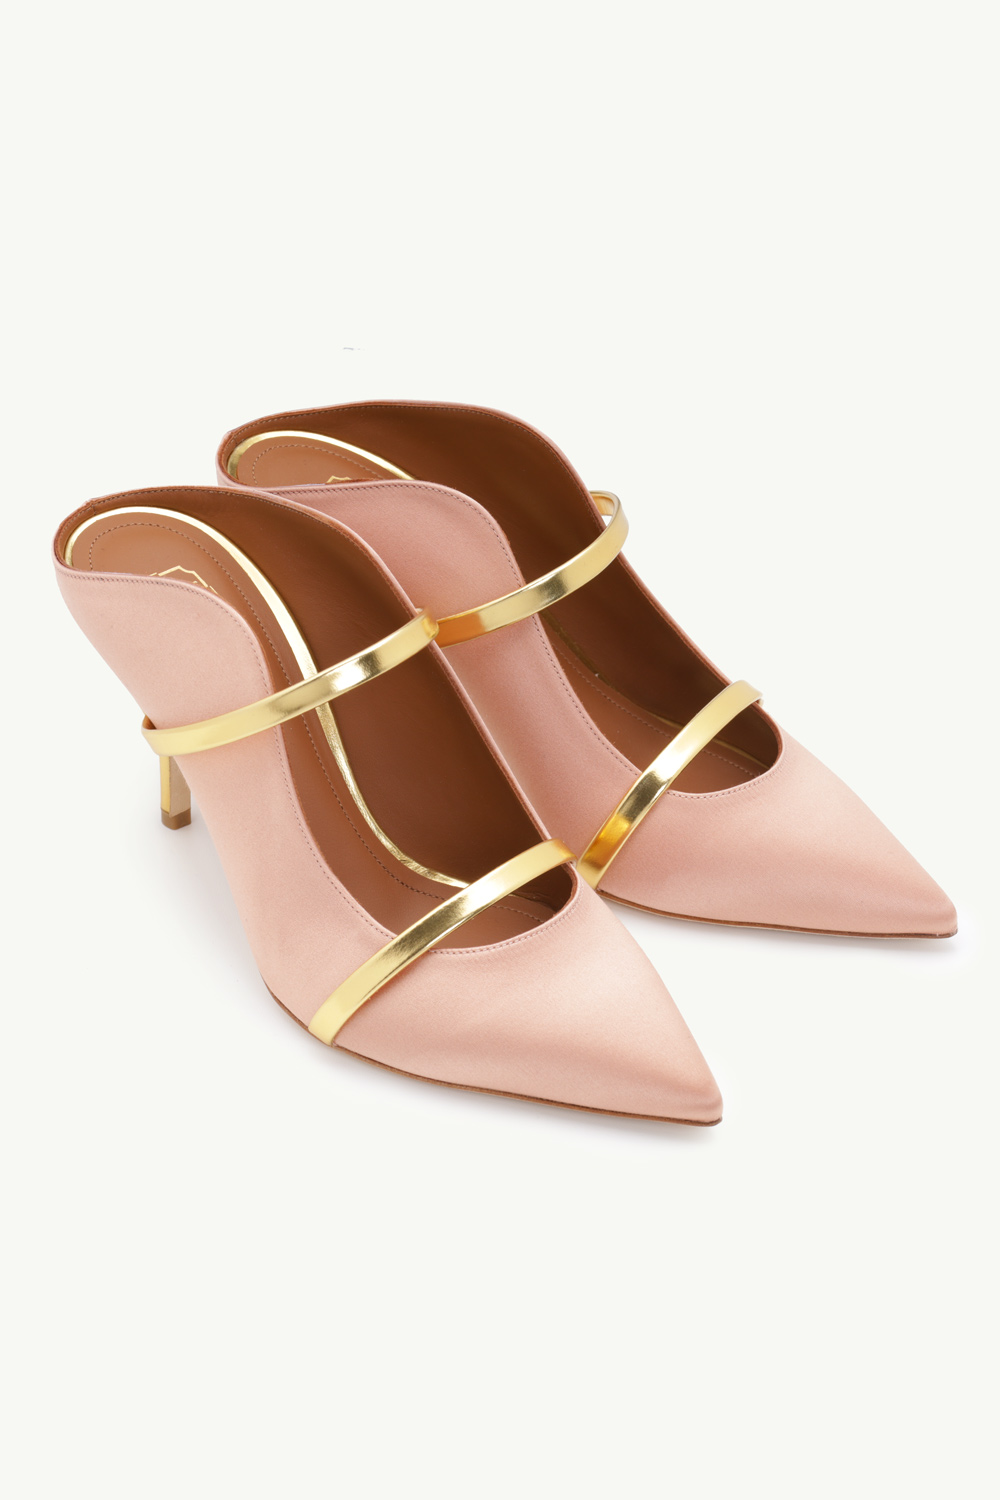 MALONE SOULIERS Maureen Pumps 70mm in Blush Satin/Gold 1